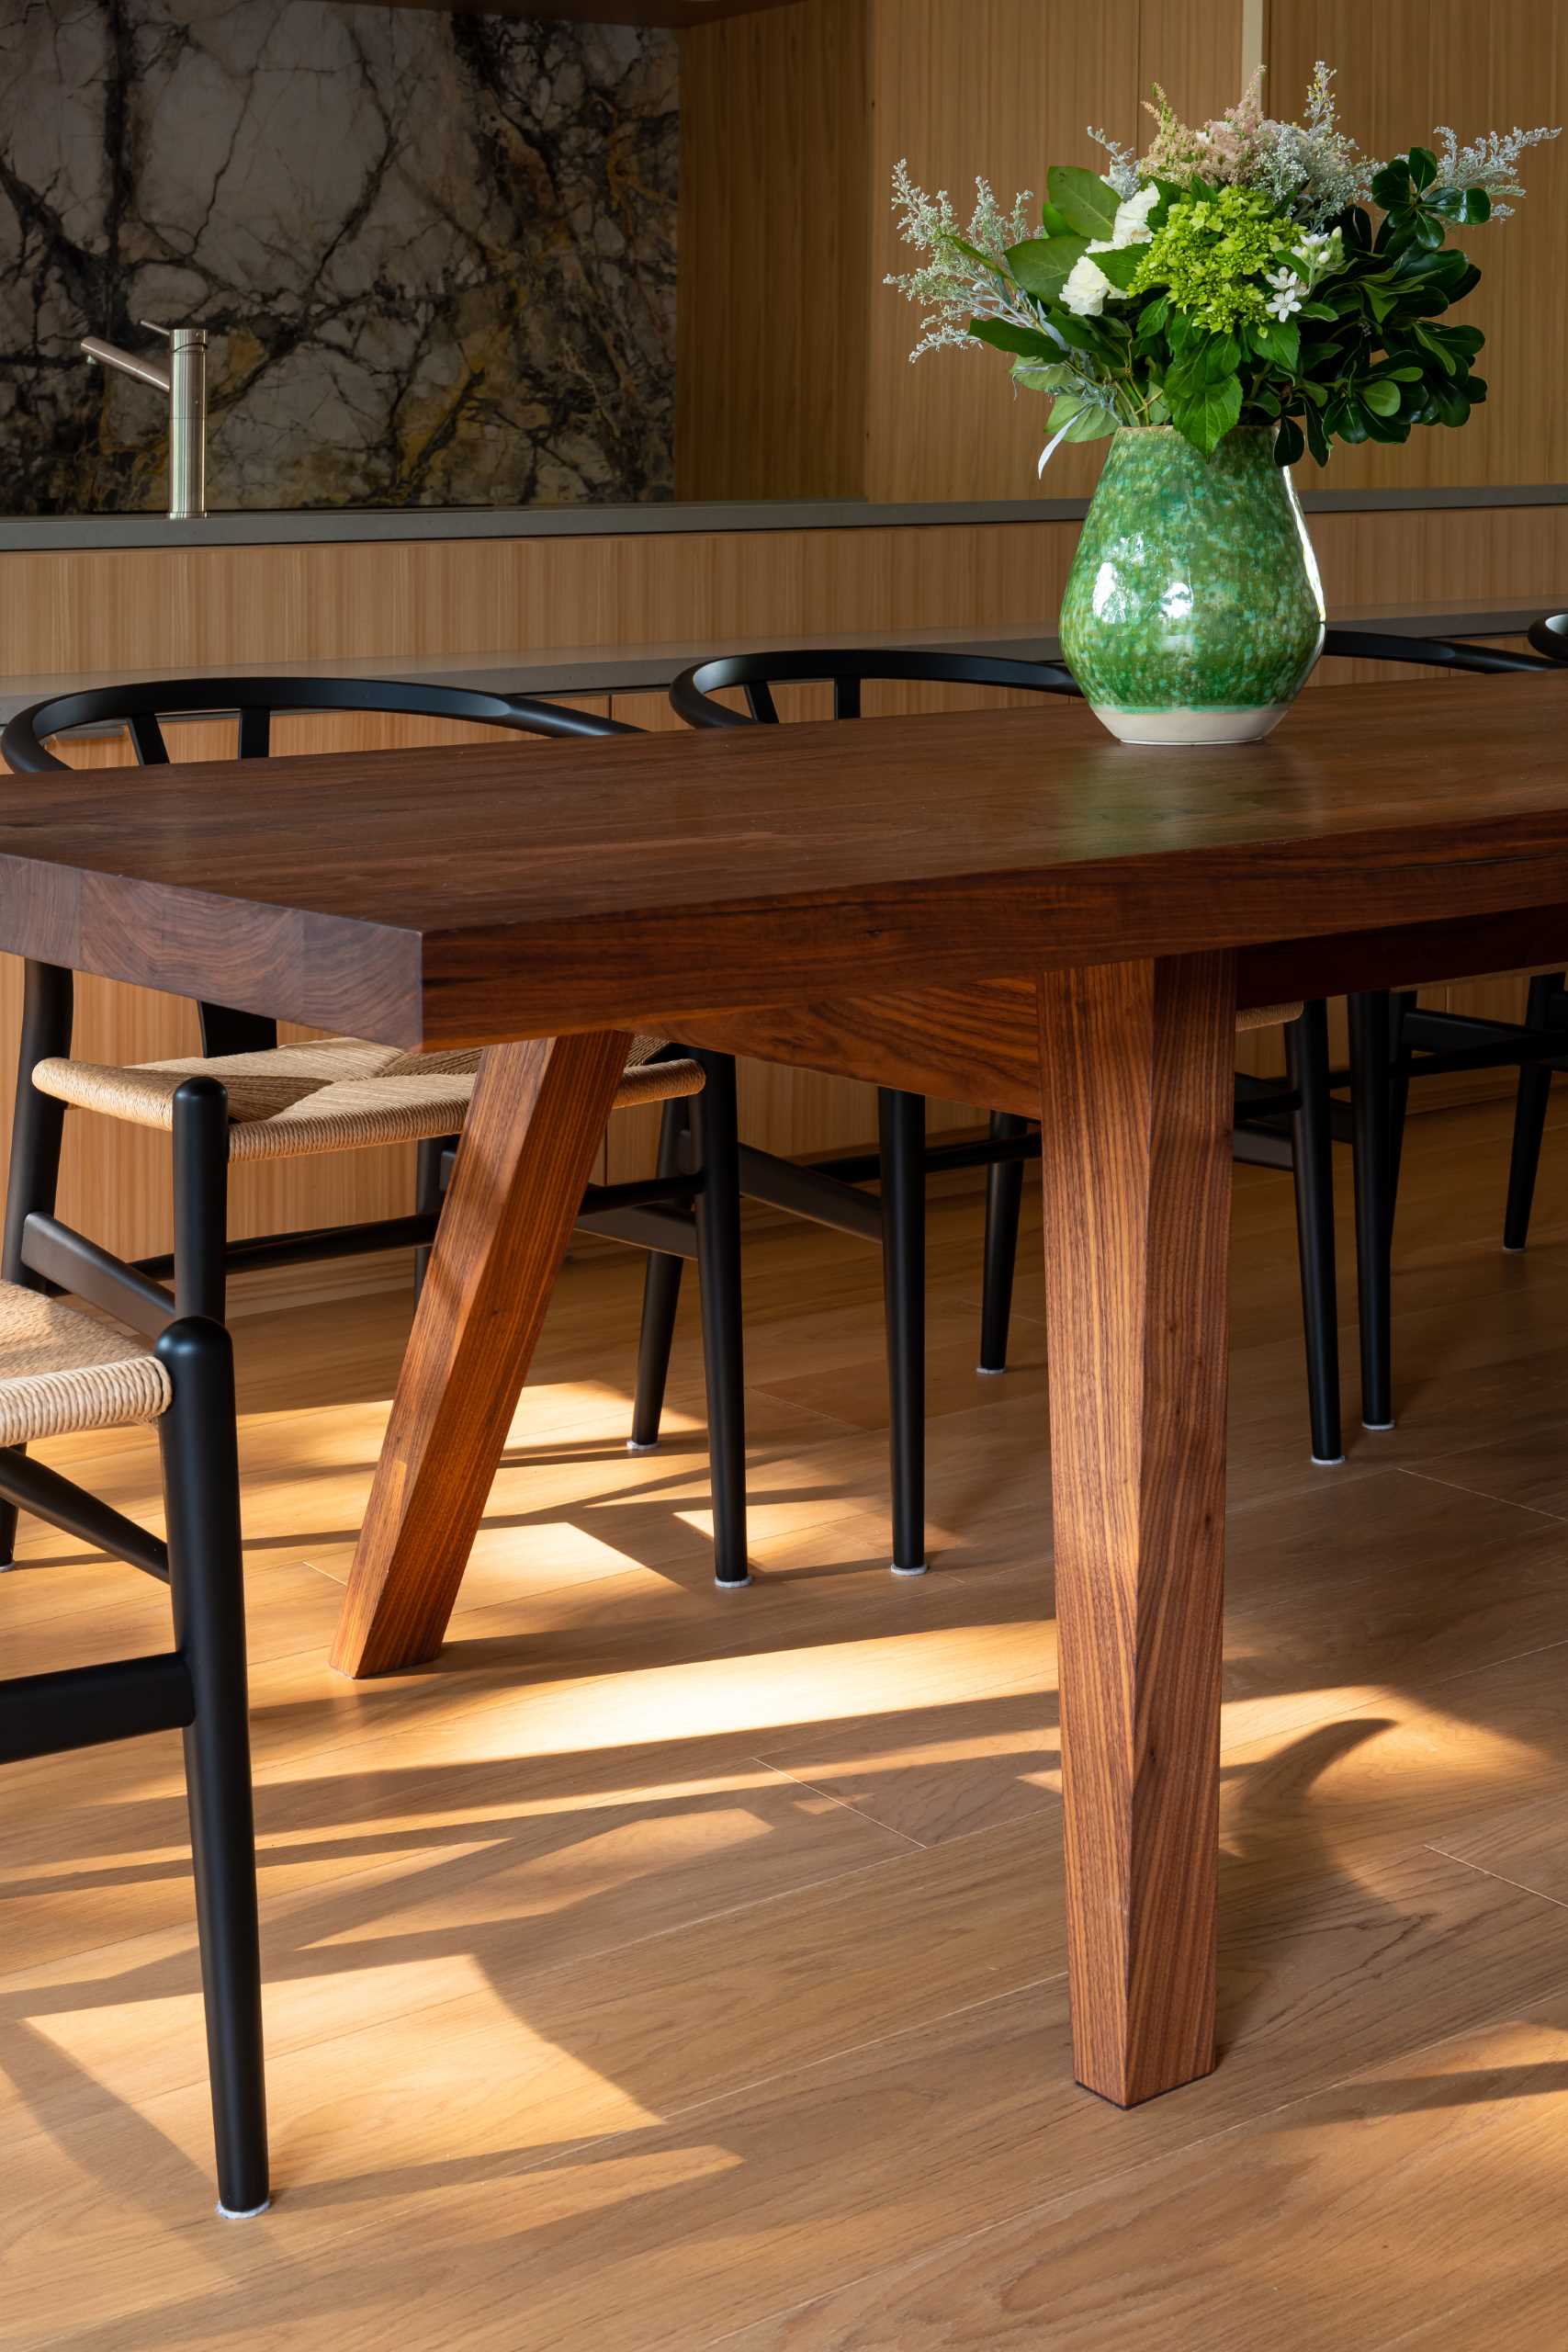 A custom-designed Harvest Table, made from solid Walnut, is a defining feature of the home, and all of the common living areas pivot around this central family gathering place.